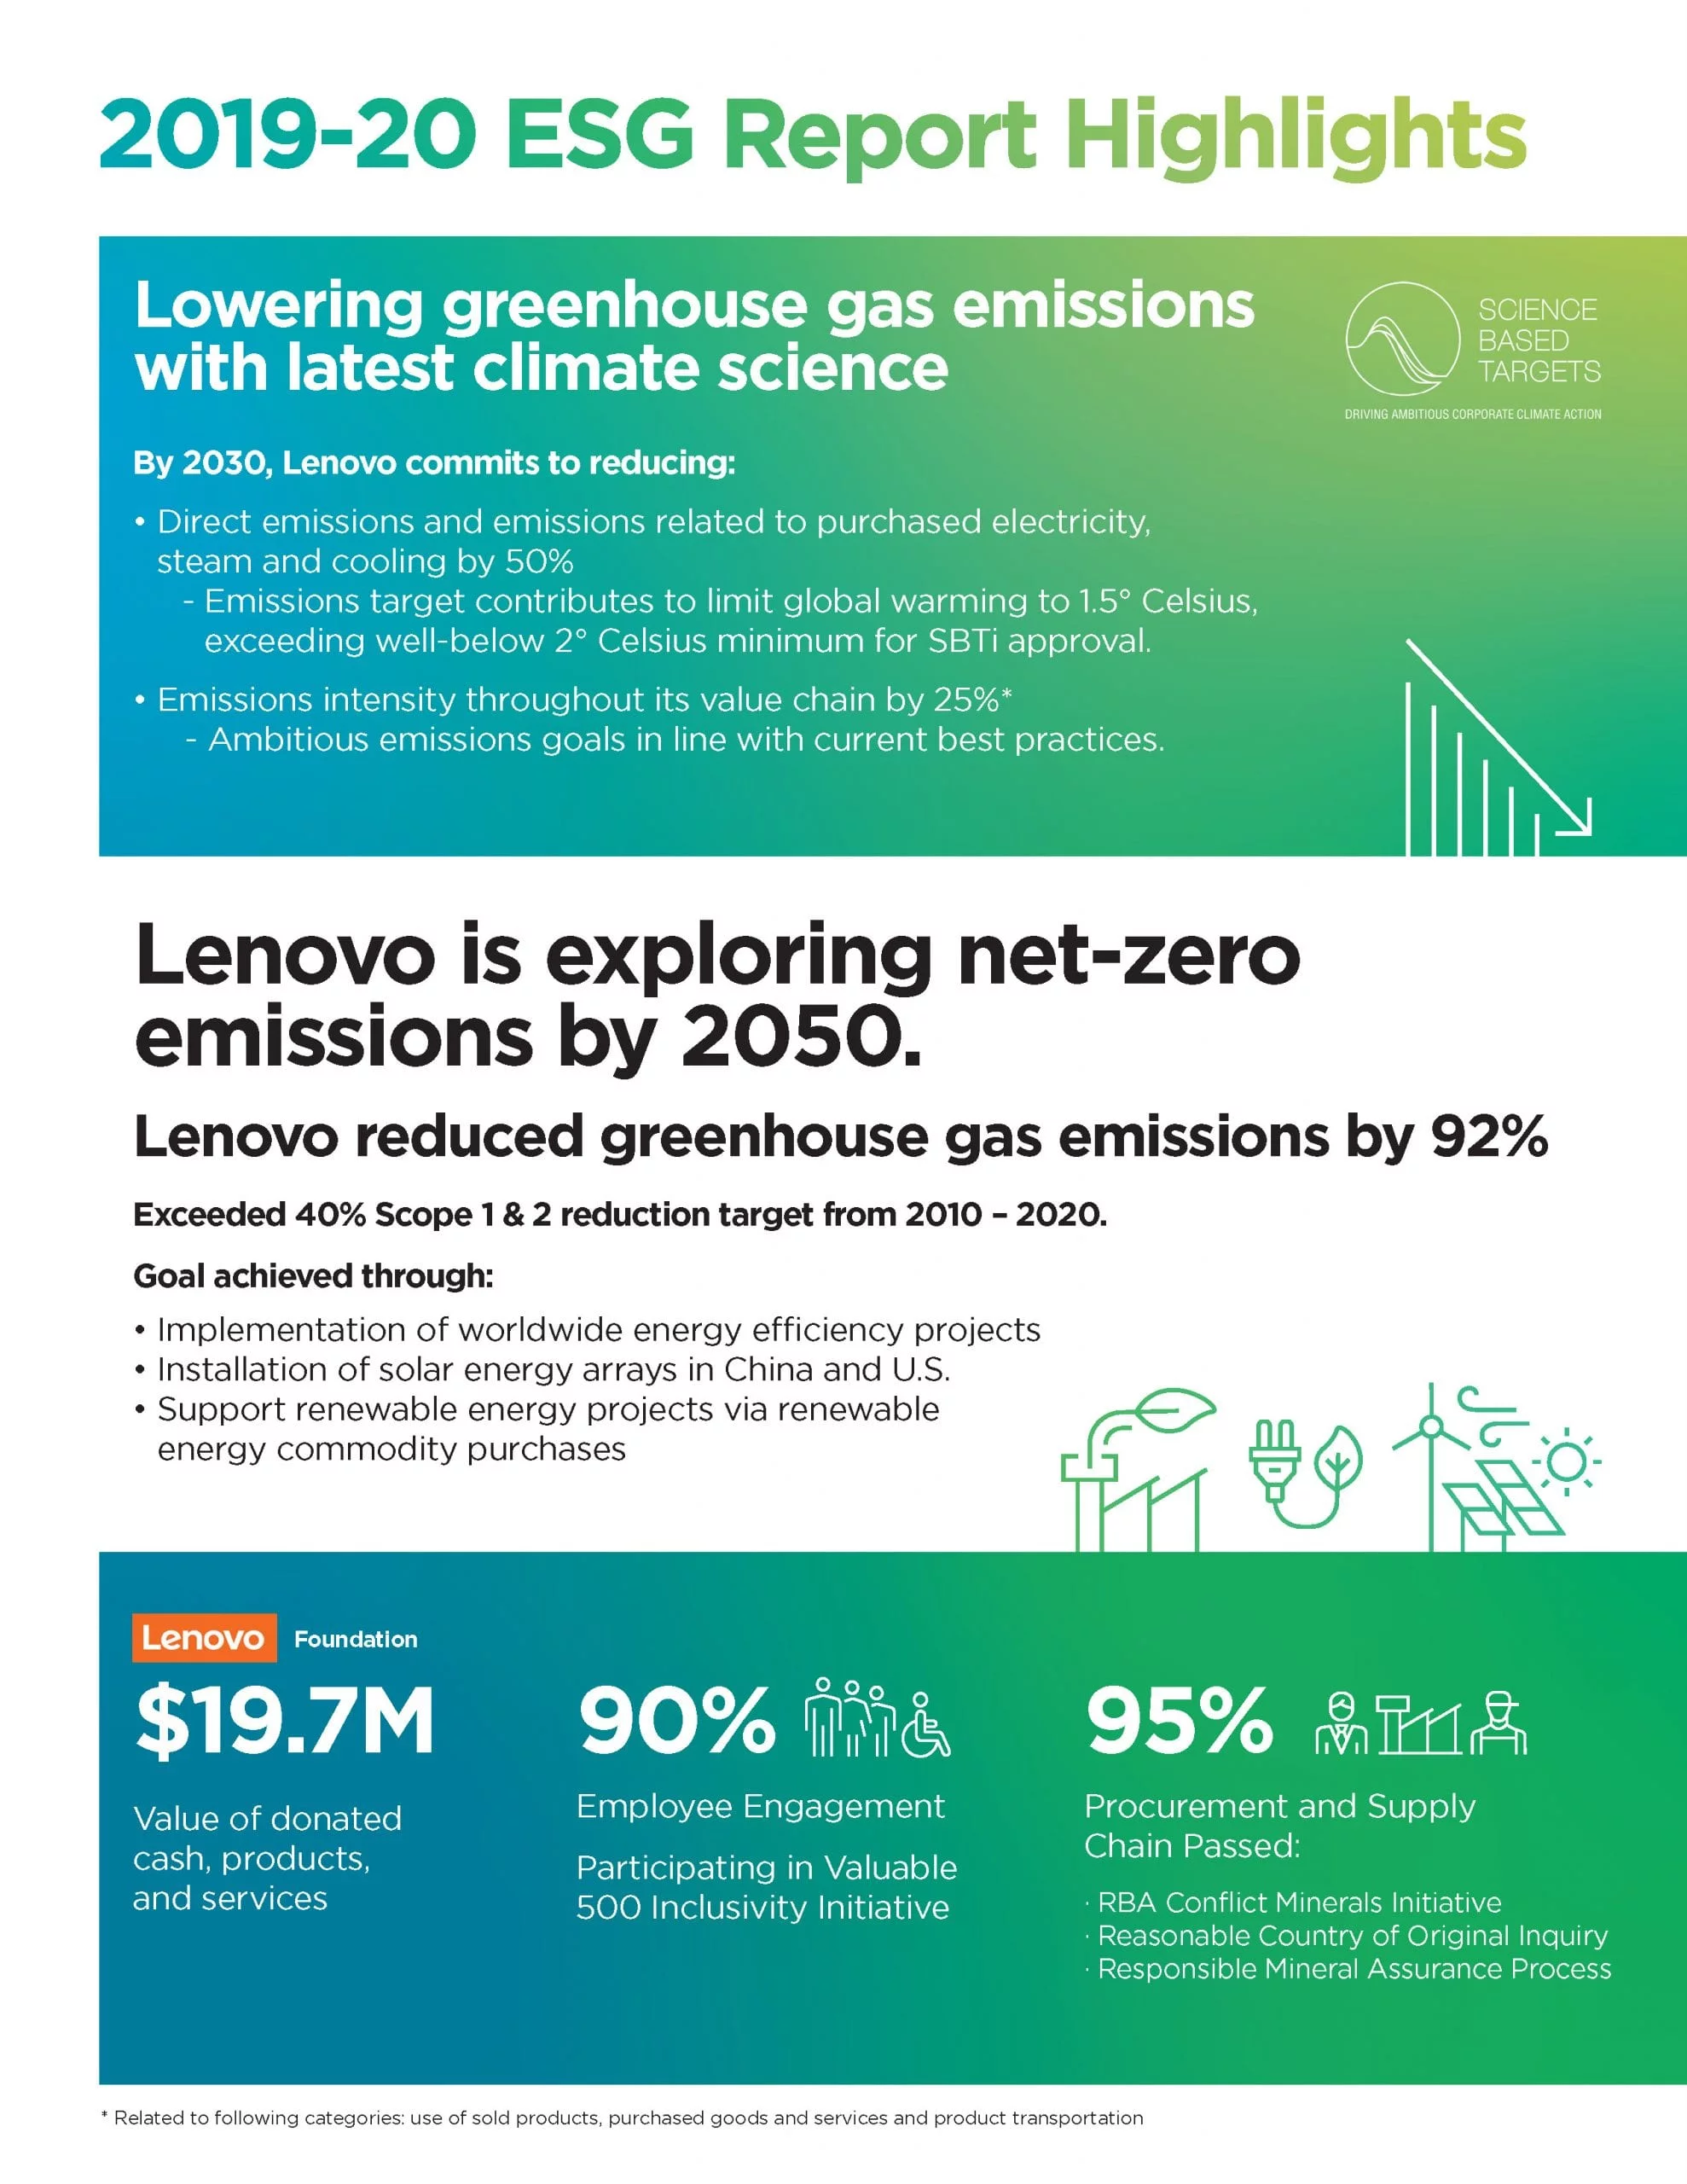 Unpacking greenhouse gas (GHG) emissions in transport, ESG and supply chains